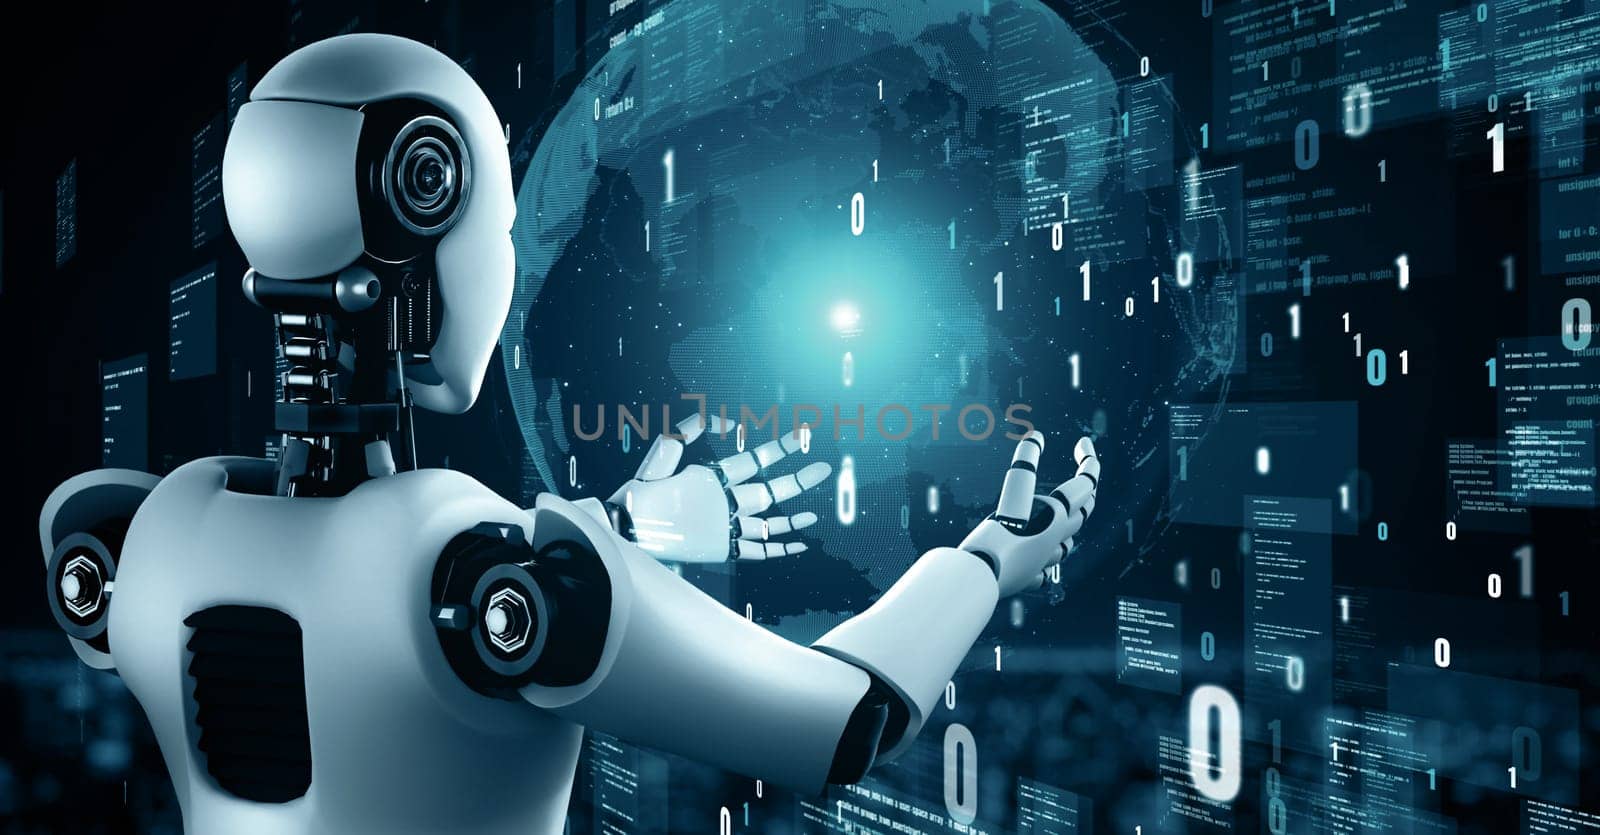 XAI 3d illustration Futuristic robot artificial intelligence huminoid AI programming coding technology development and machine learning concept. Robotic bionic science research for future of human life. 3D rendering.